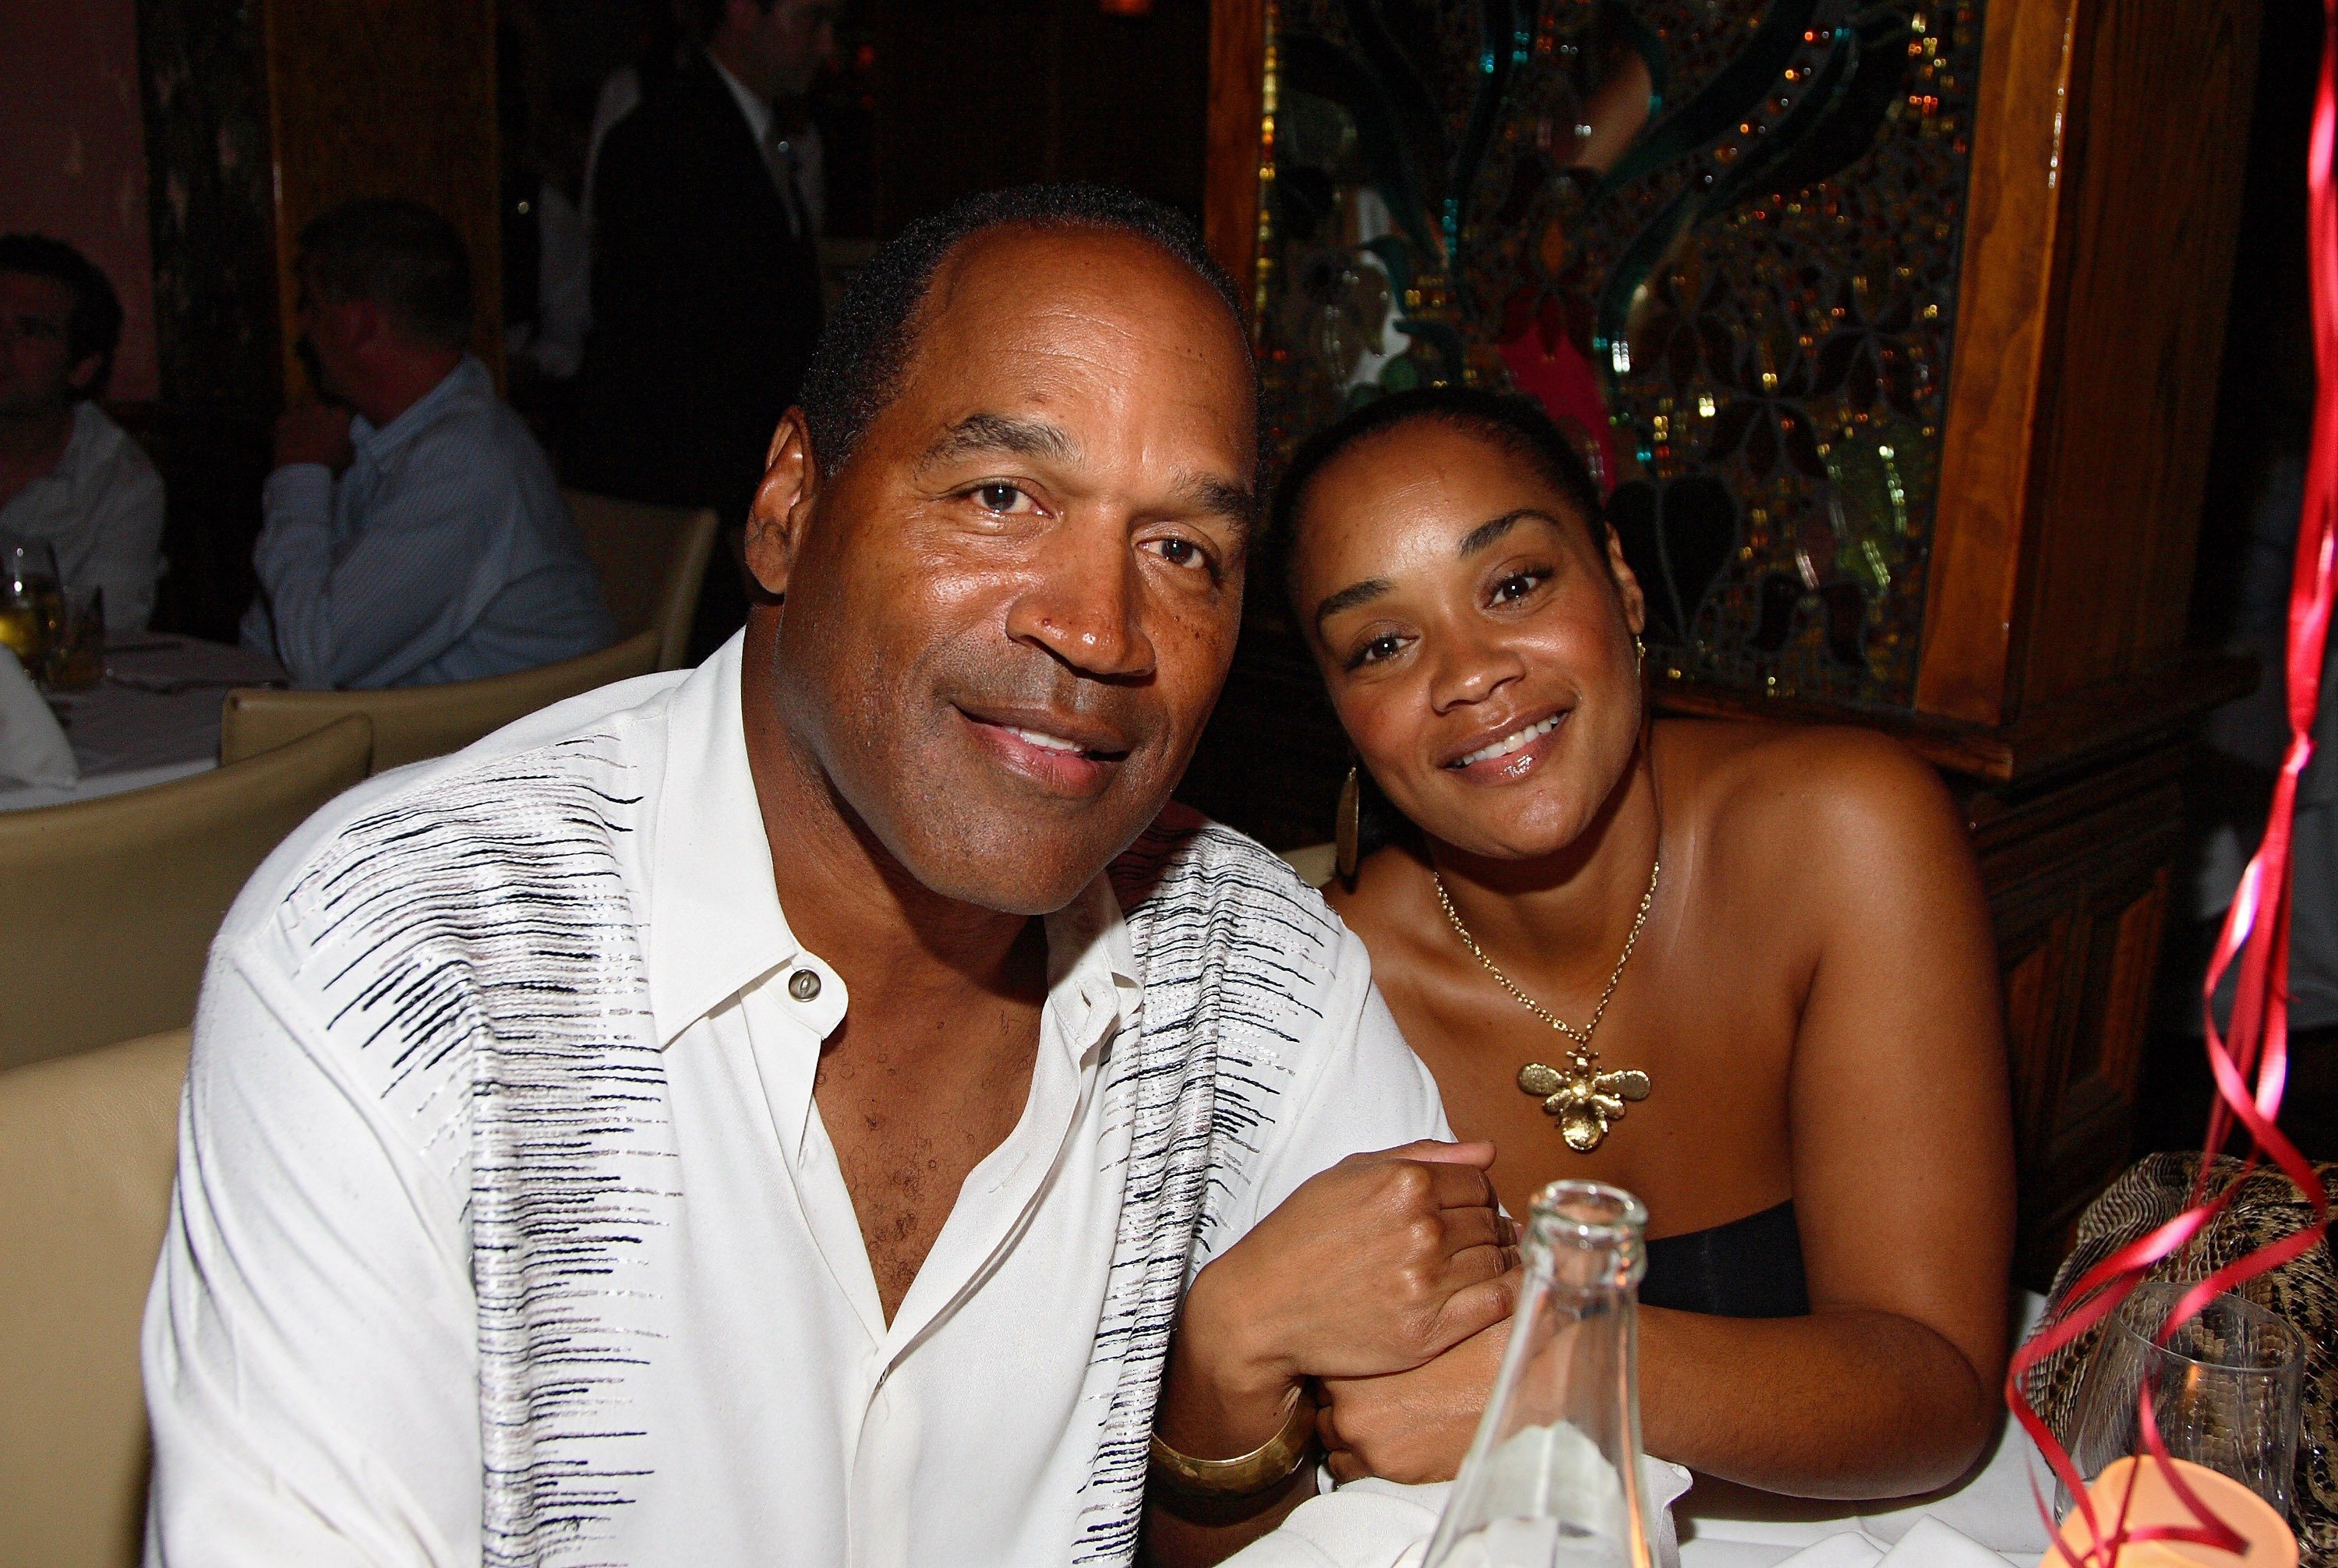 O.J. Simpson and his daughter Arnelle Simpson at the Forge restaurant on June 20, 2007, in Miami Beach, Florida. | Source: Getty Images